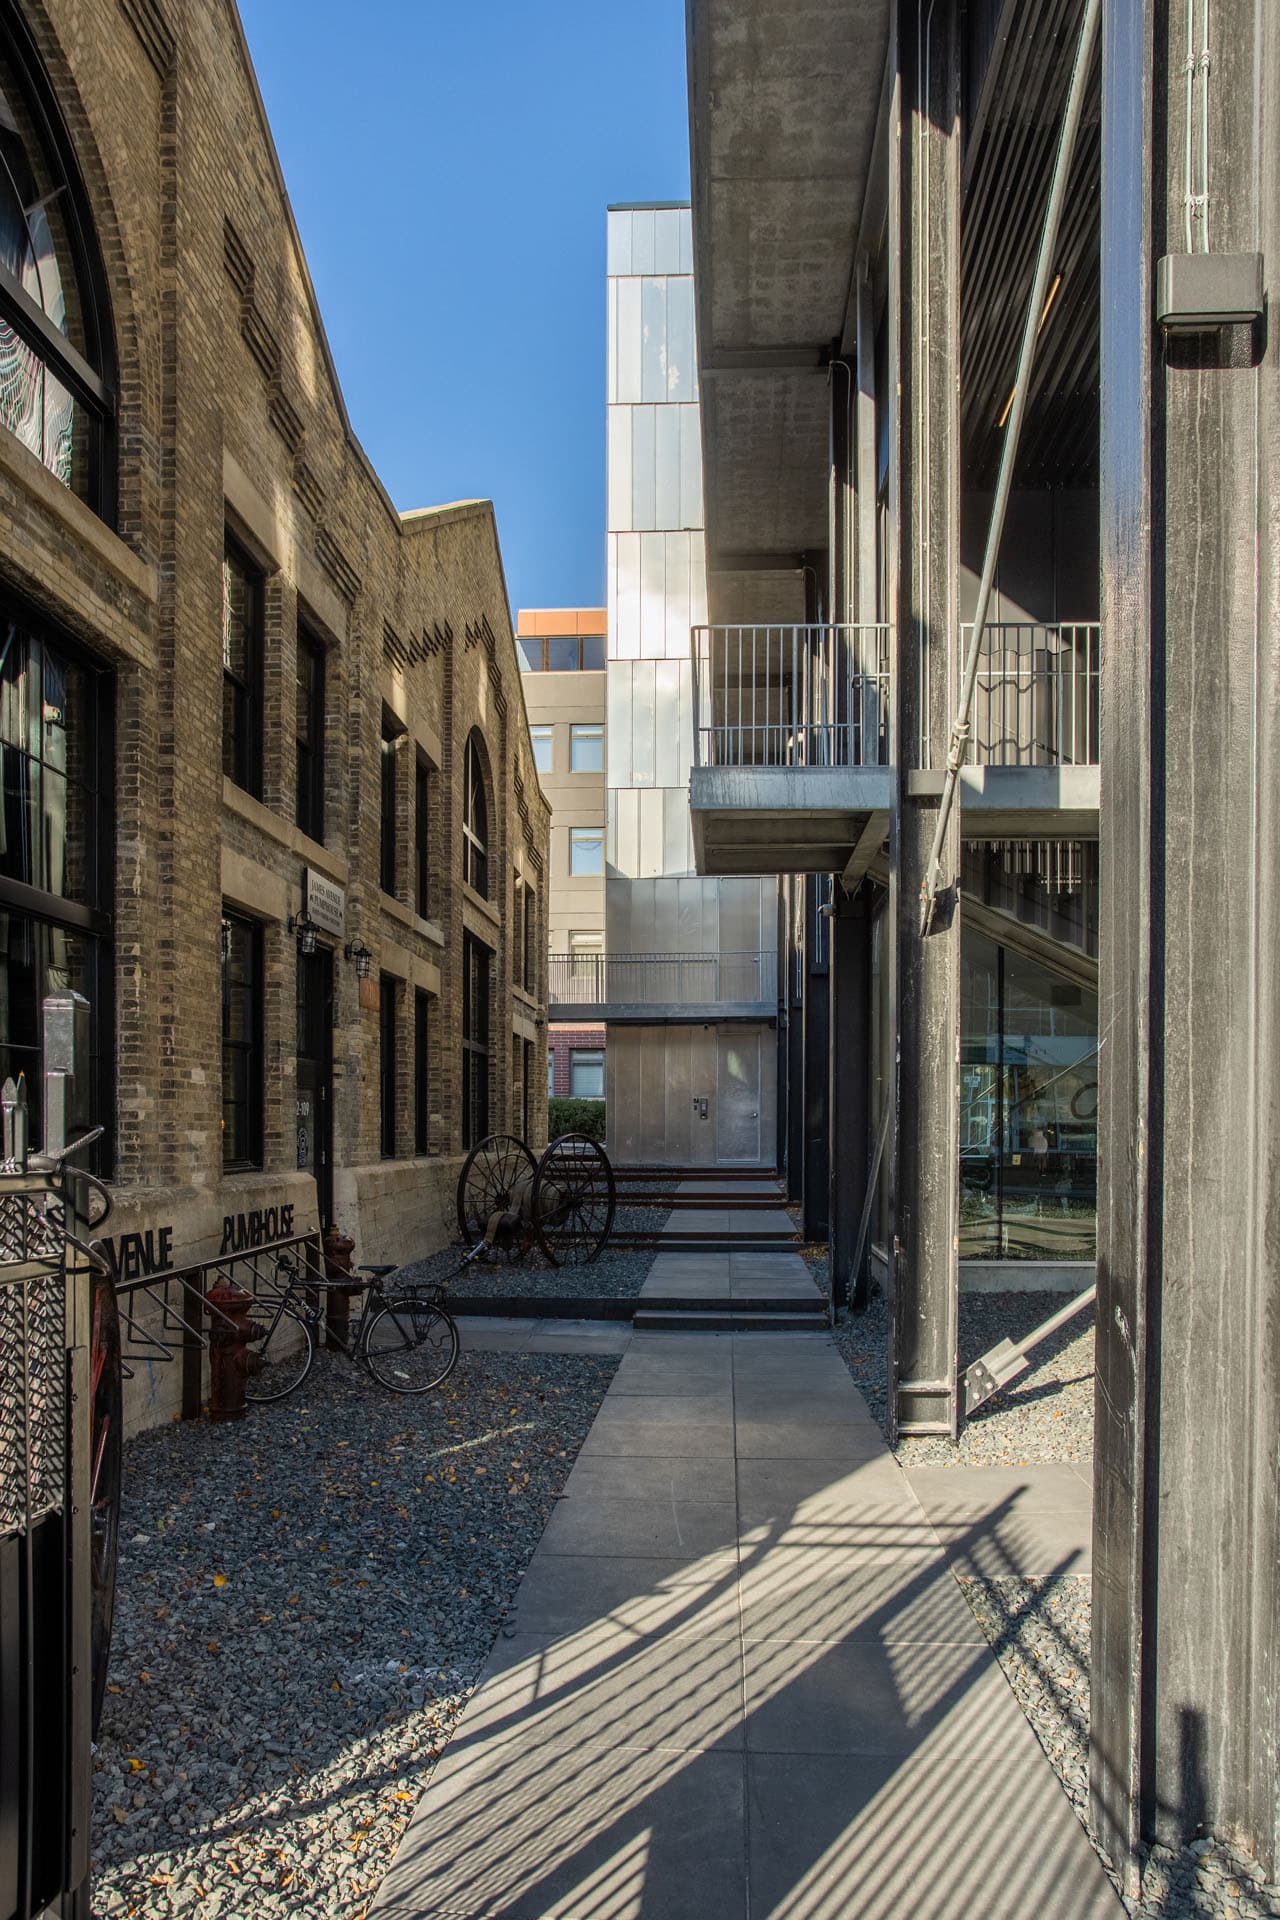 A designer build downtown alley pathway, between a brick business building and brick residential condos, with sleek concrete slate steps and gravel.